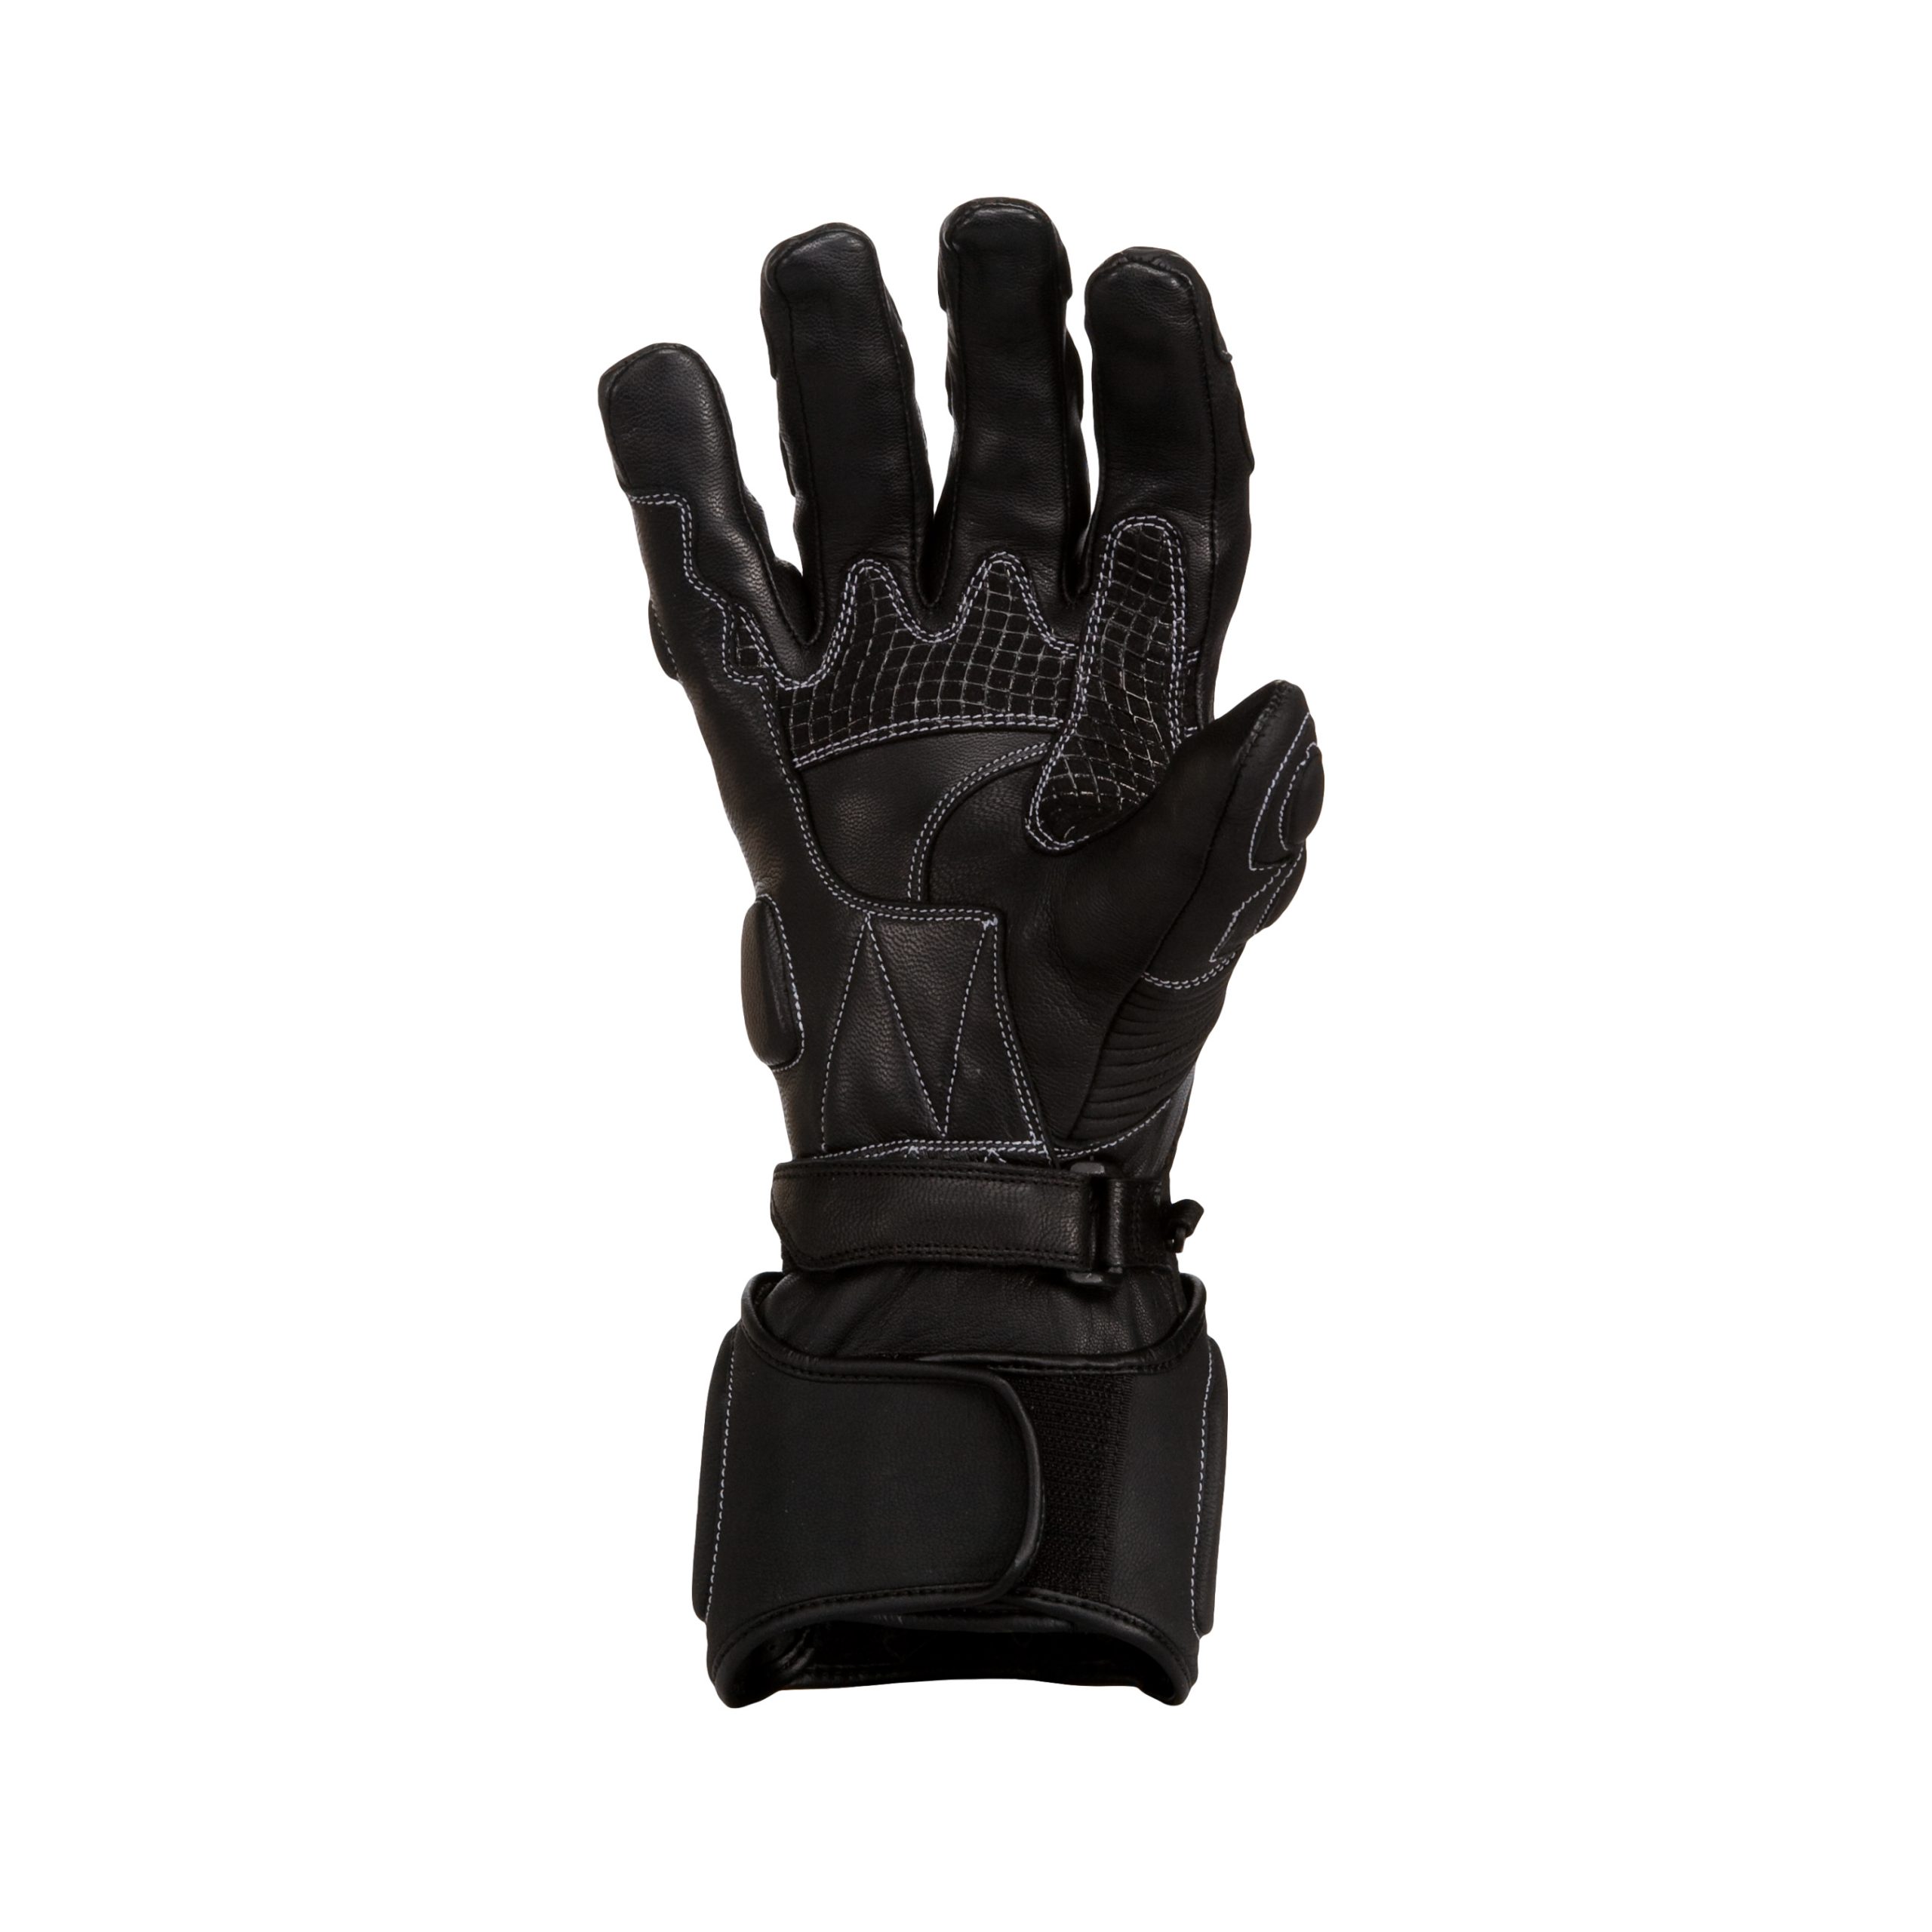 Great Summer Motorcycle Gloves